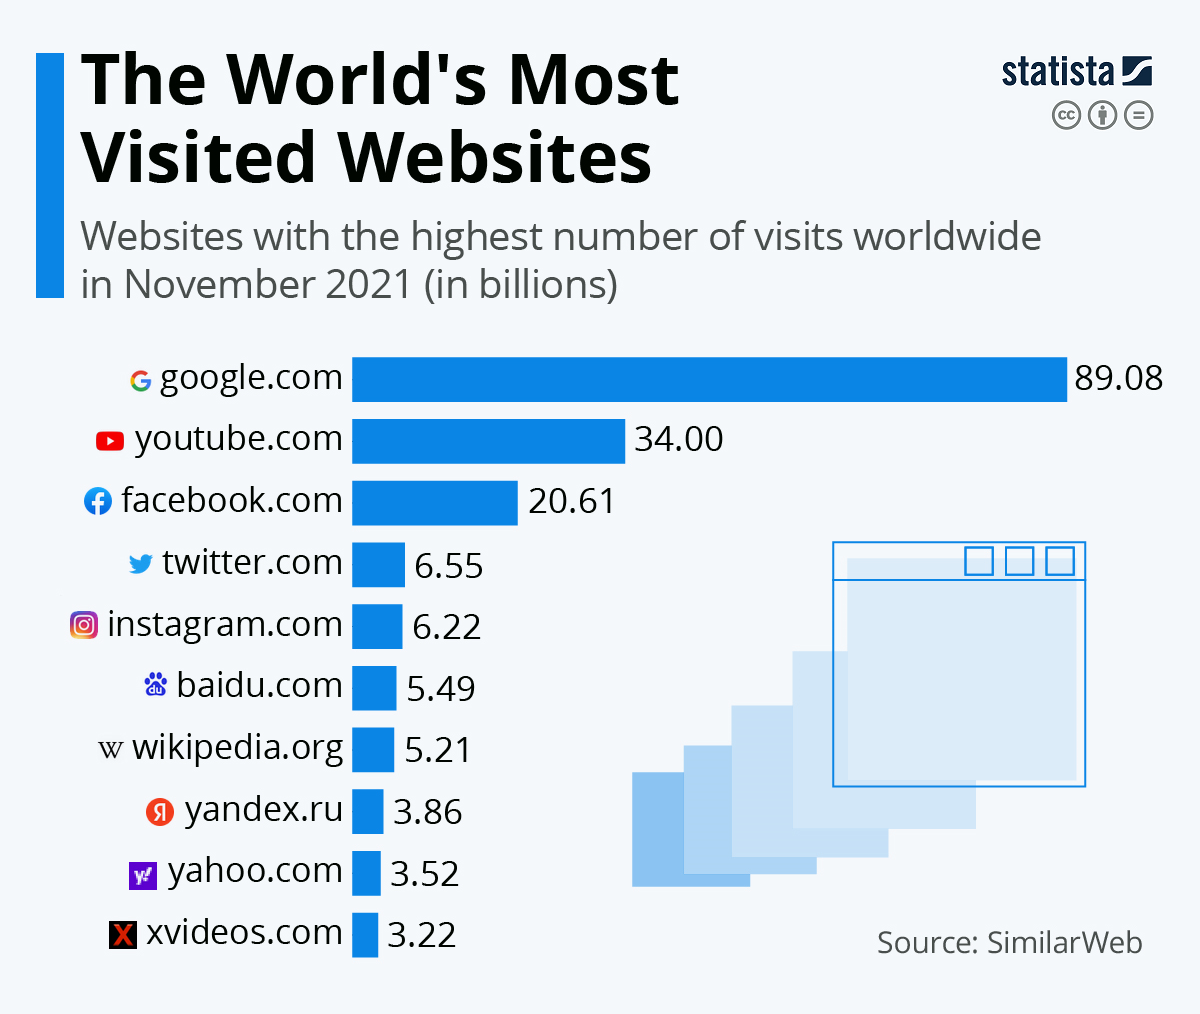 What Are the Most Visited Websites in the World?